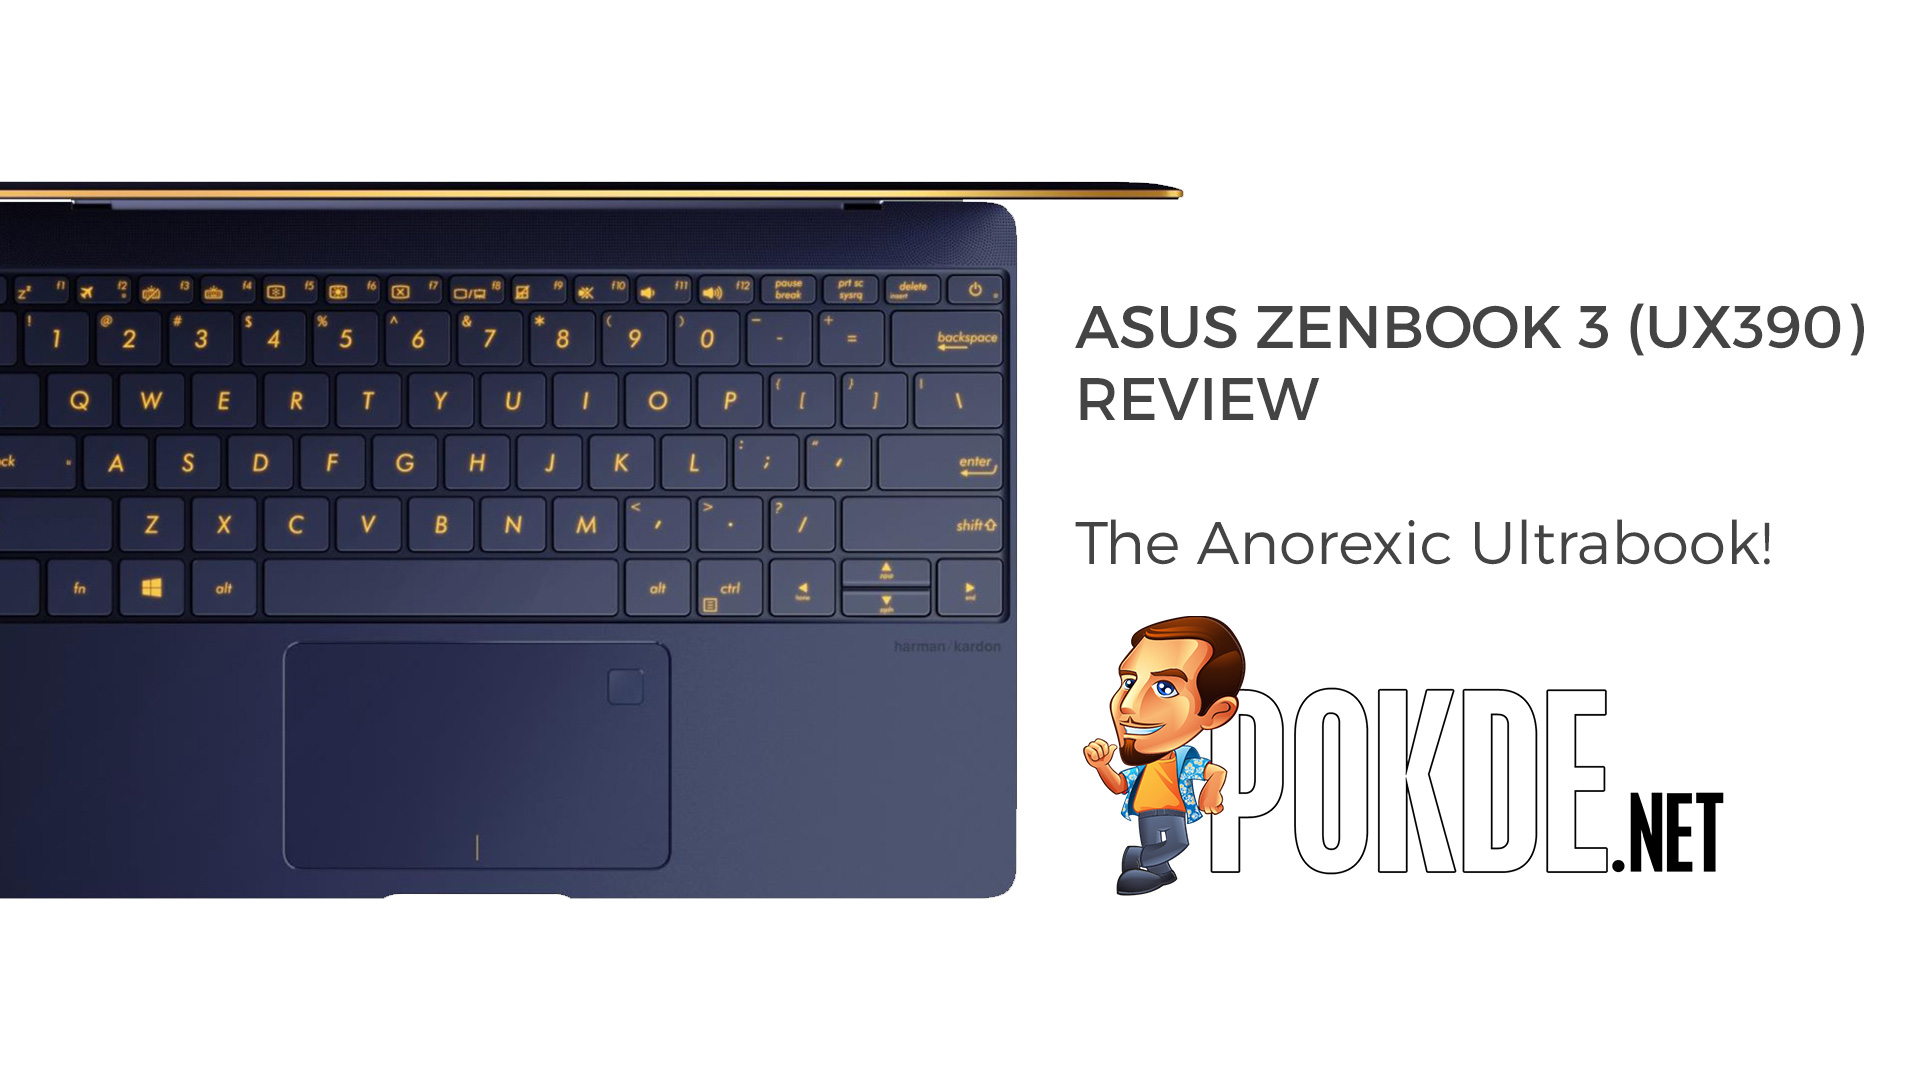 Asus ZenBook 3 (UX390) Review - The Anorexic Ultrabook 26